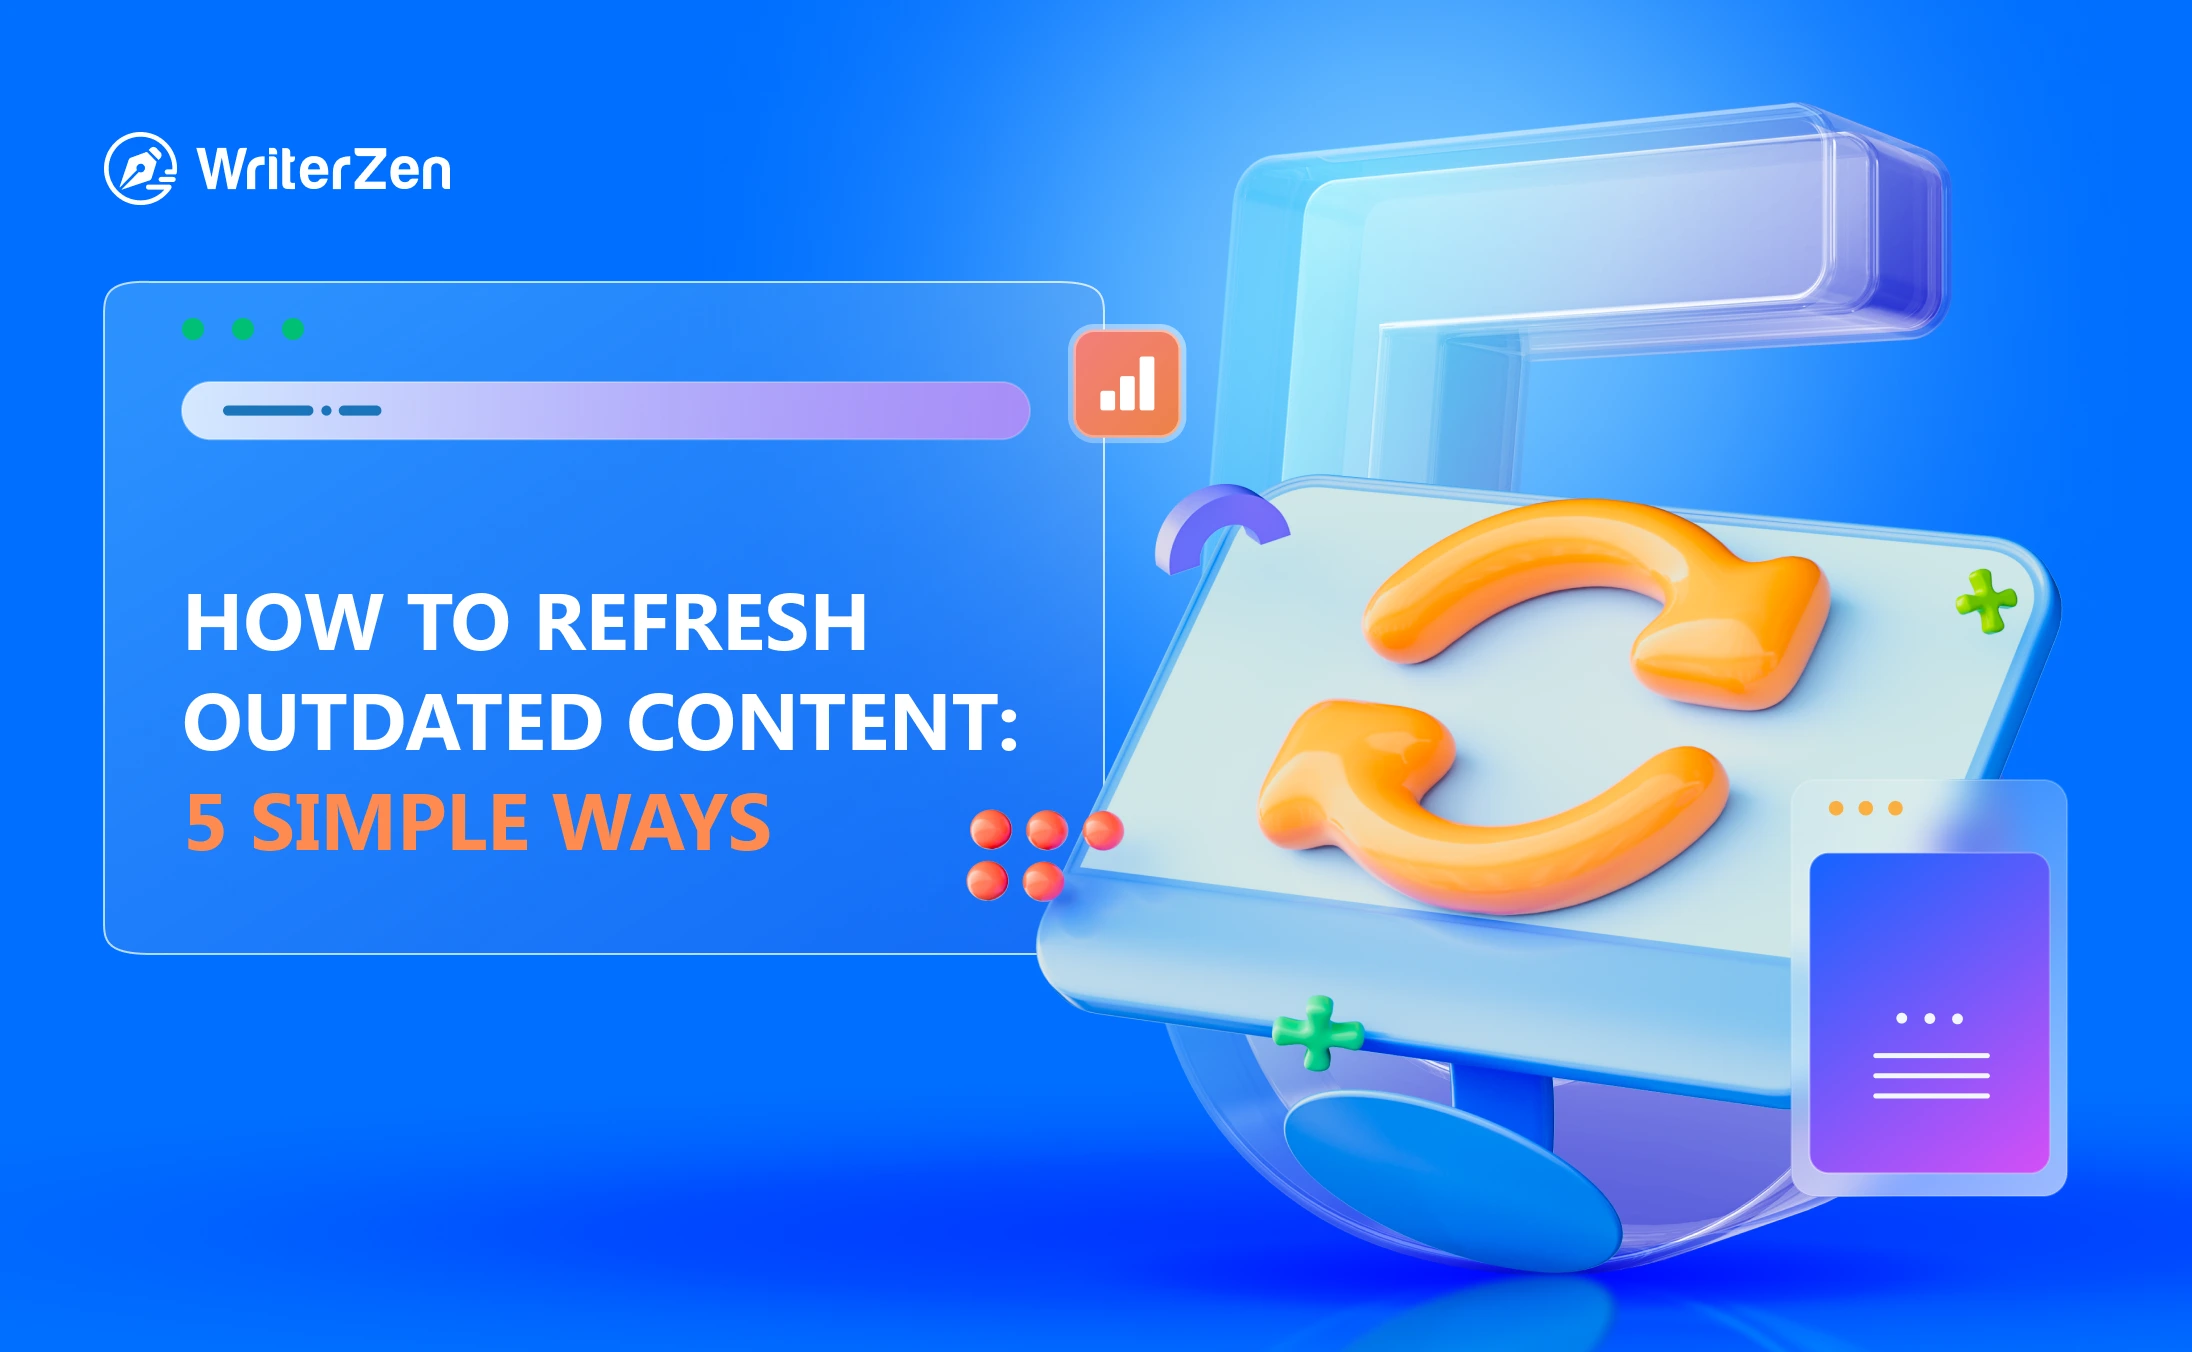 How to Refresh Outdated Content: 5 Simple Ways